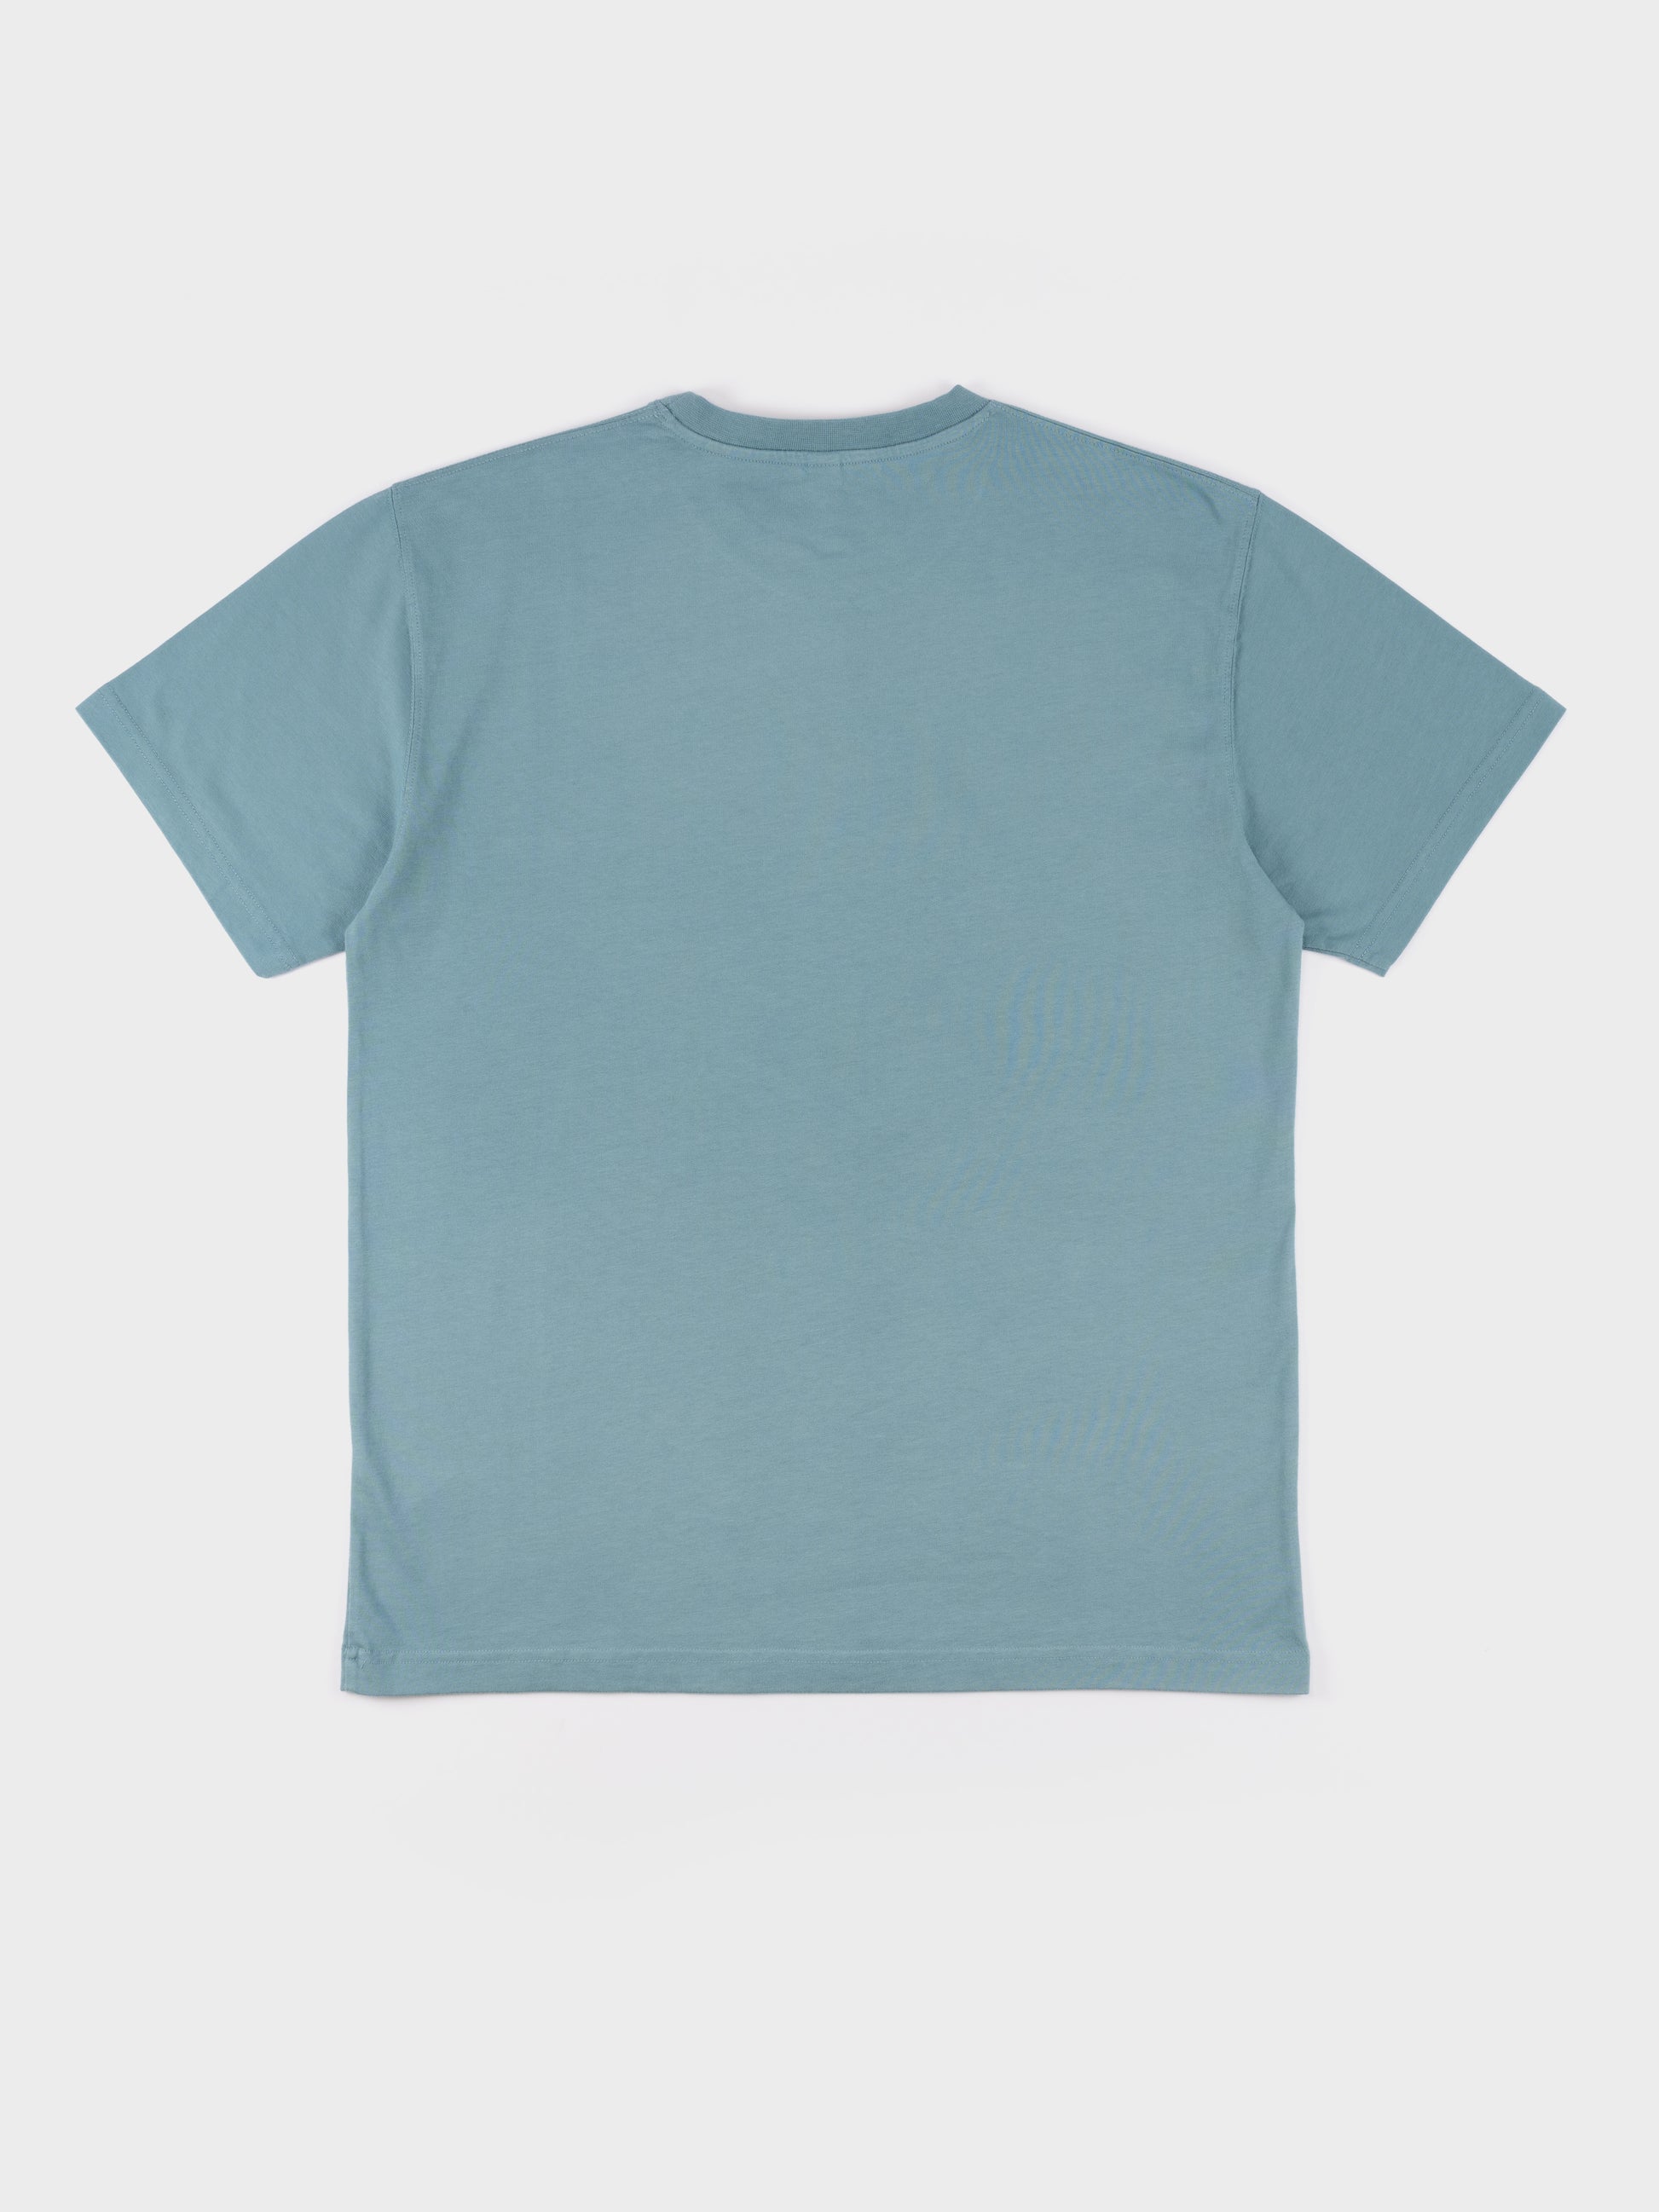 Reception Toasted SS T Shirt - Dusty Green